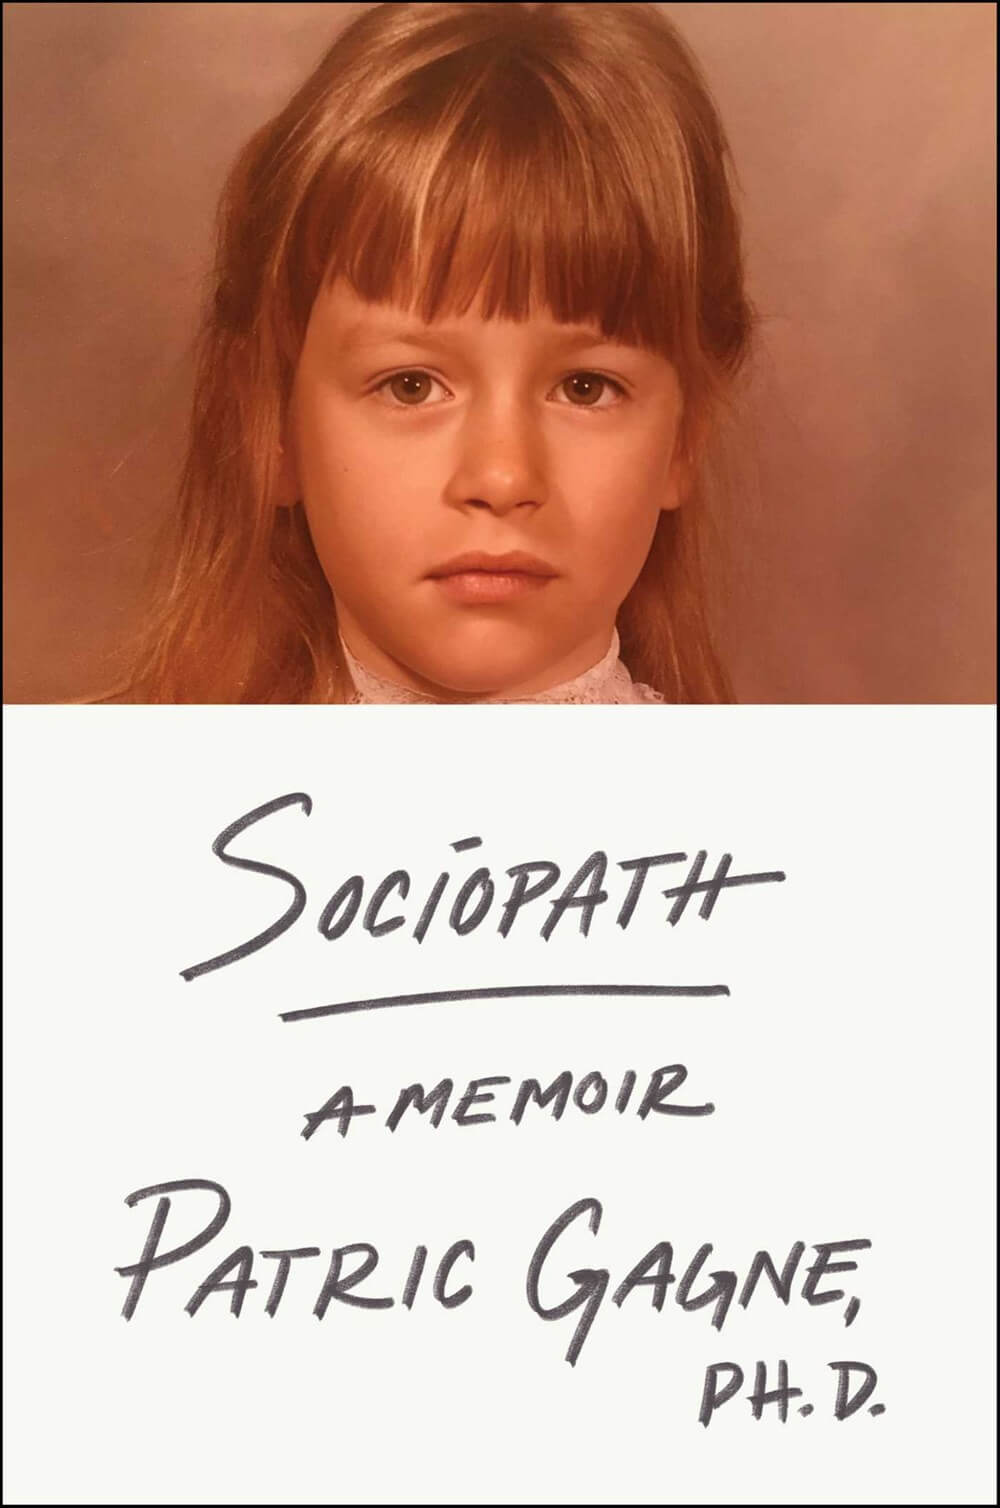 The cover for 'Sociopath'.